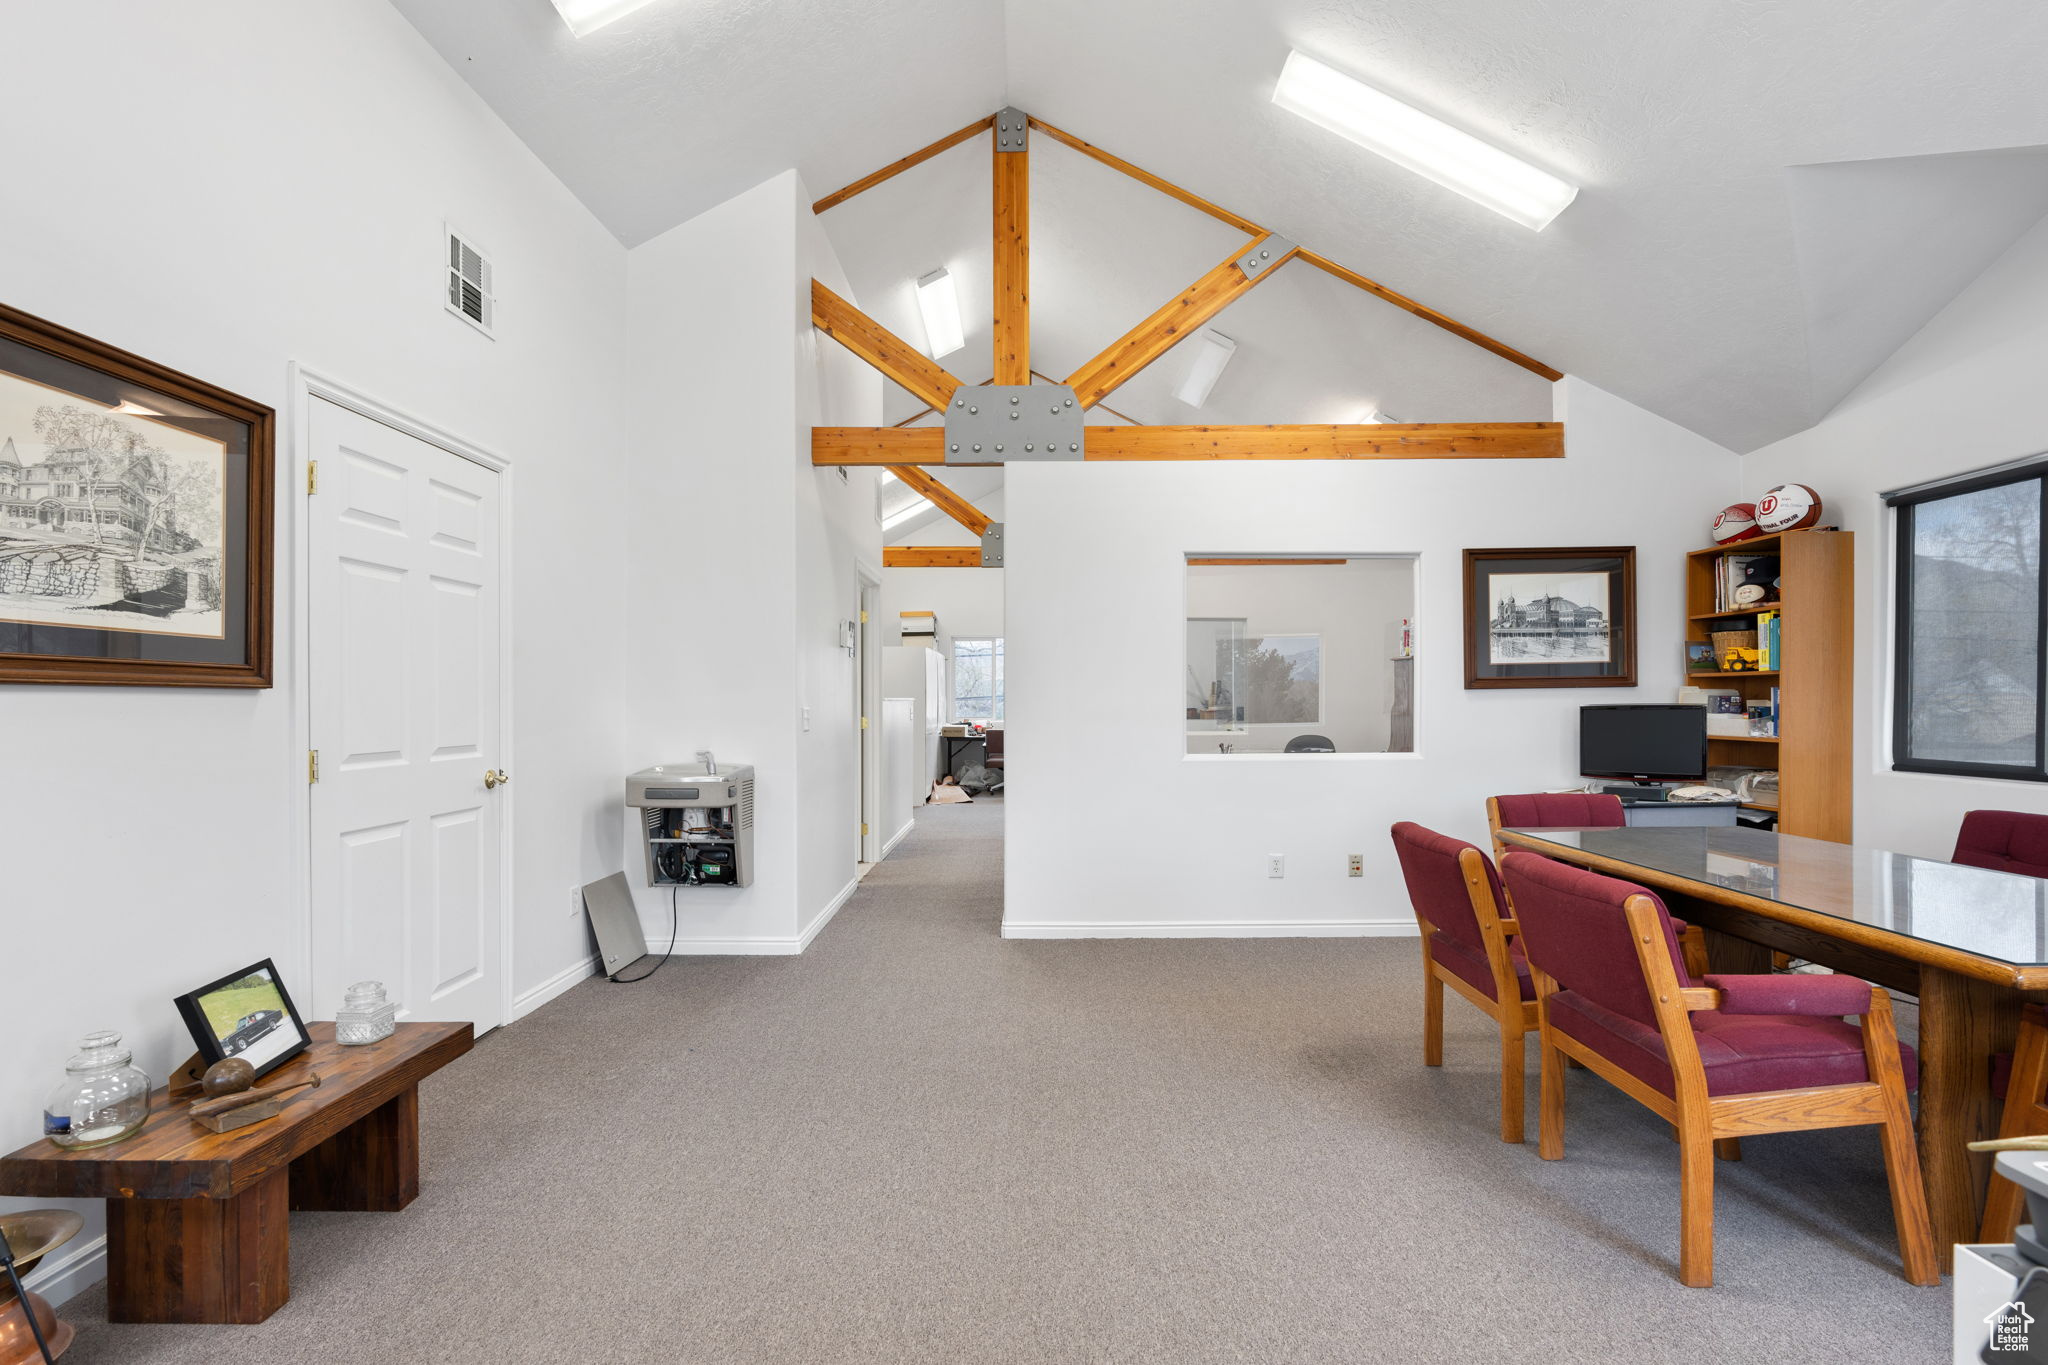 Carpeted office space with high vaulted ceiling and beamed ceiling